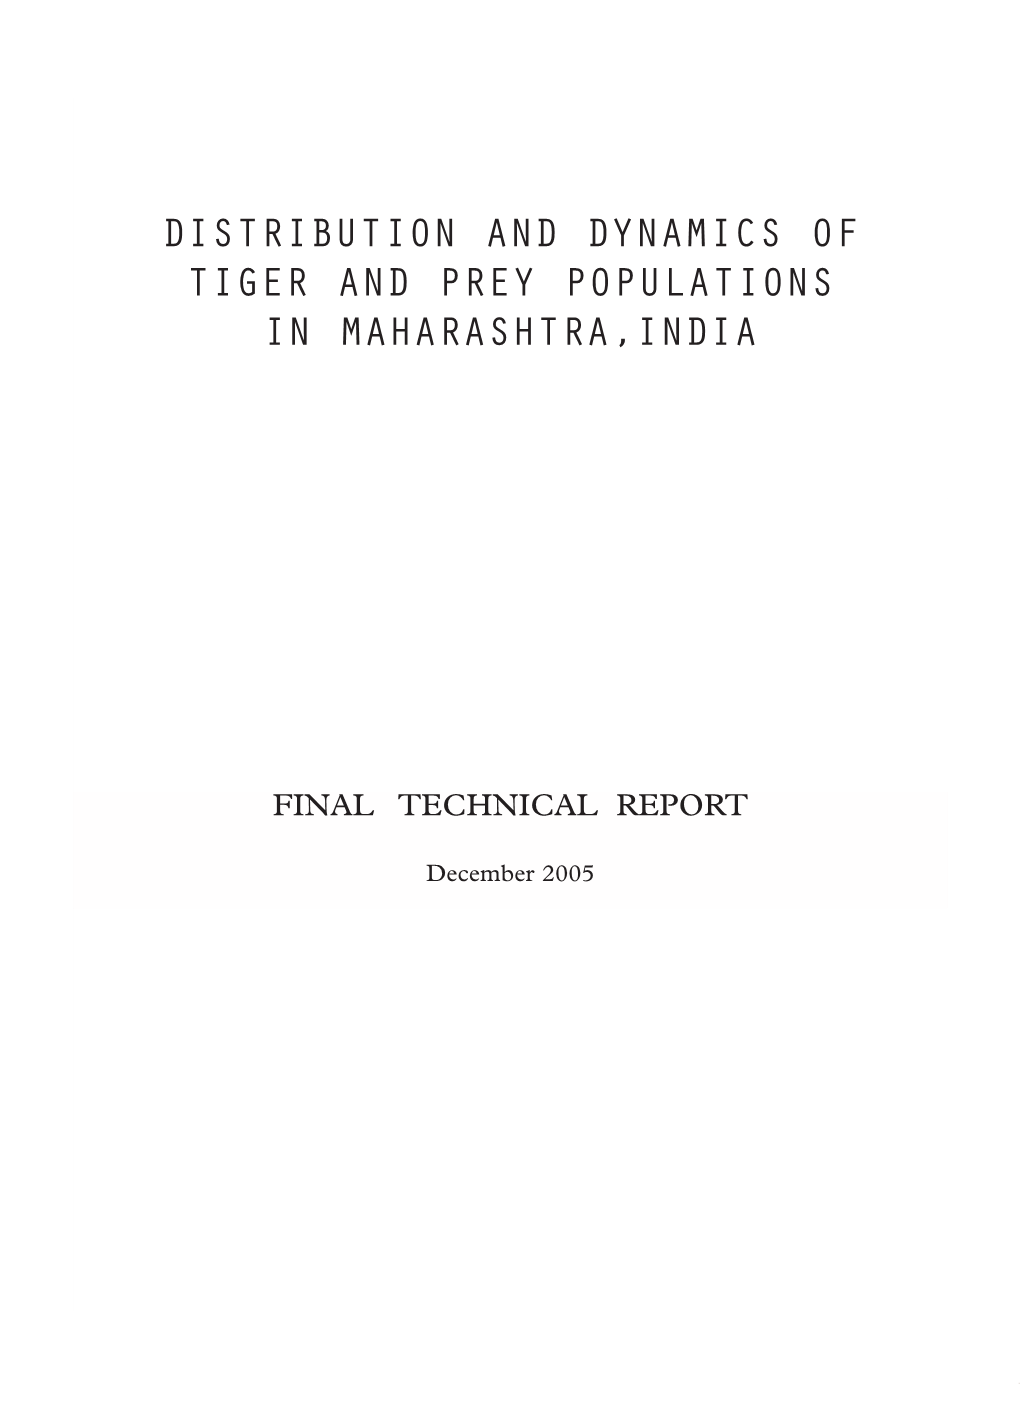 Distribution and Dynamics of Tiger and Prey Populations in Maharashtra,India